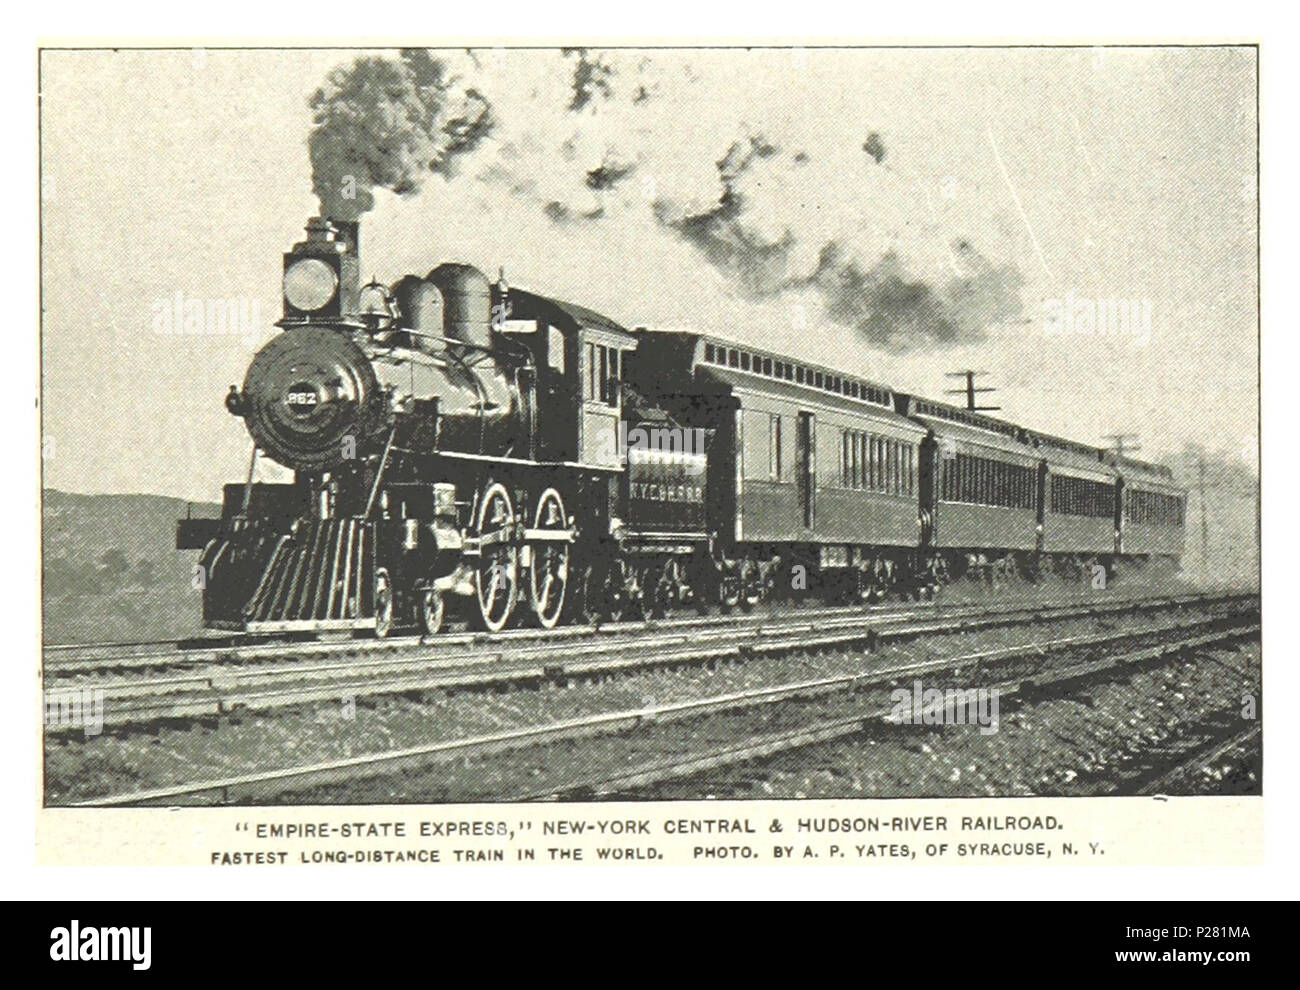 (King1893NYC) pg119 EMPIRE STATE EXPRESS, NEW-YORK CENTRAL ET HUDSON-RIVER RAILROAD. Banque D'Images